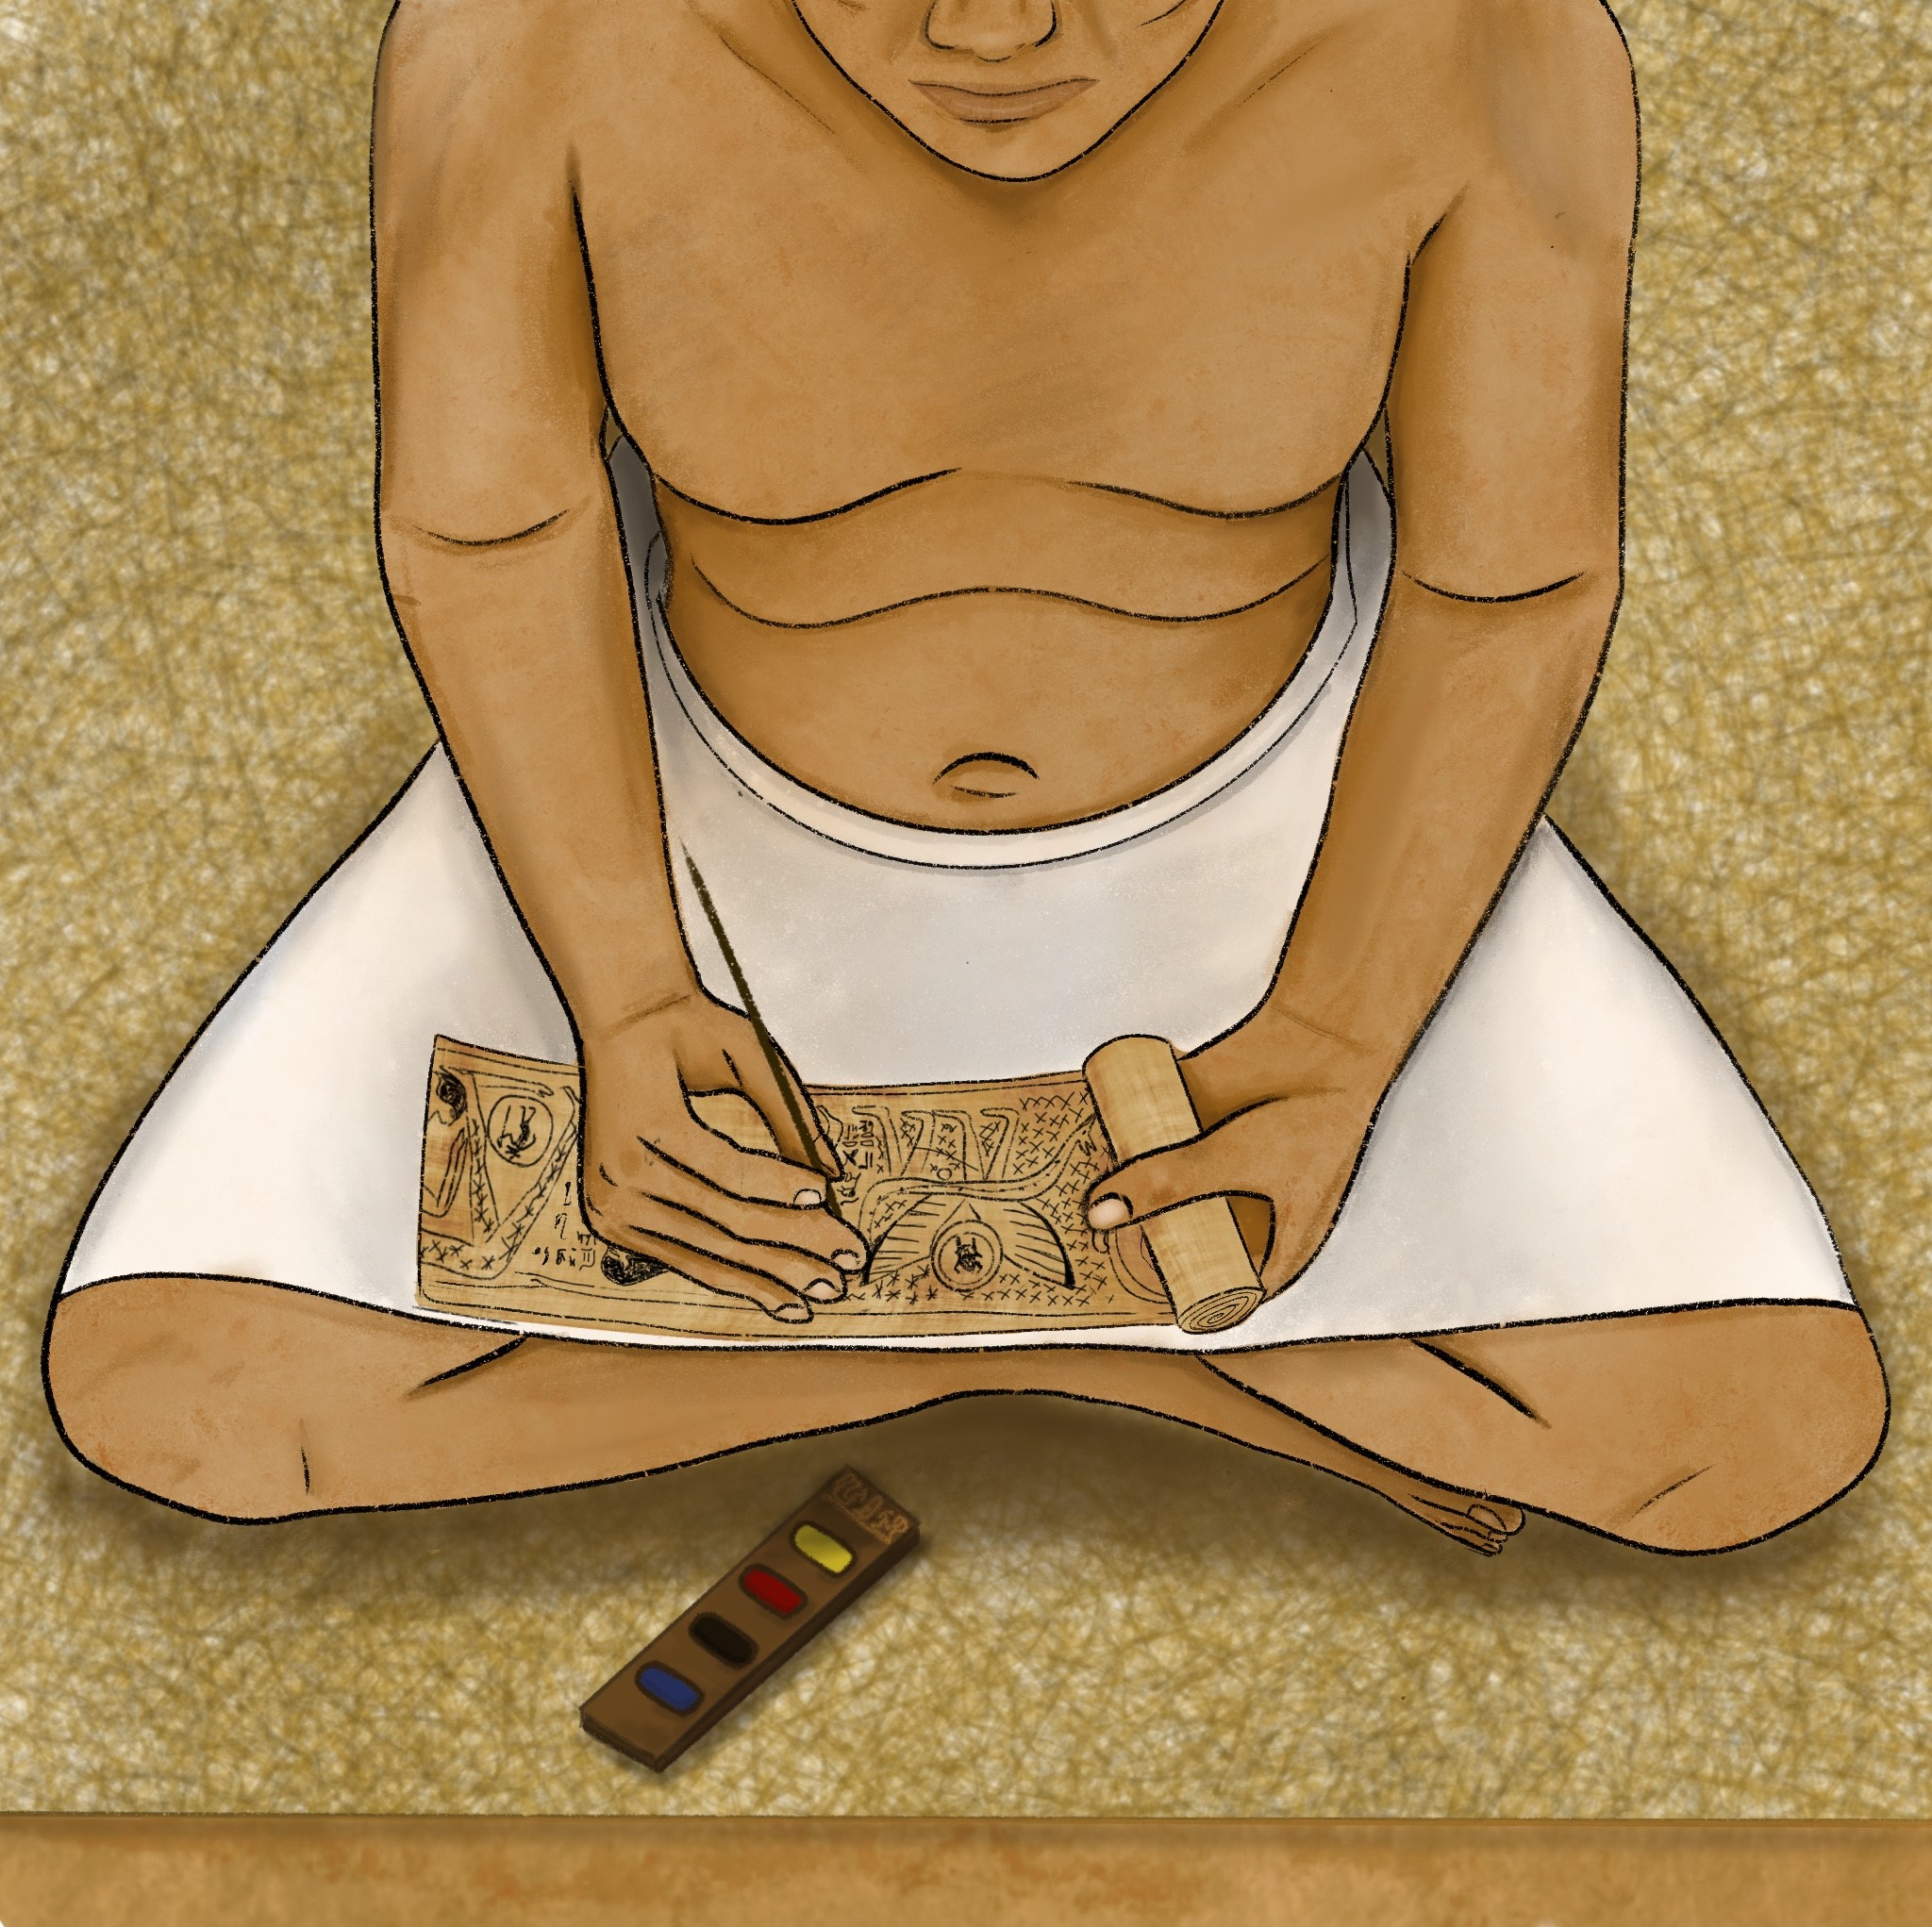 An Egyptian scribe sits cross-legged on a mat drawing onto a sheet of rolled papyrus.